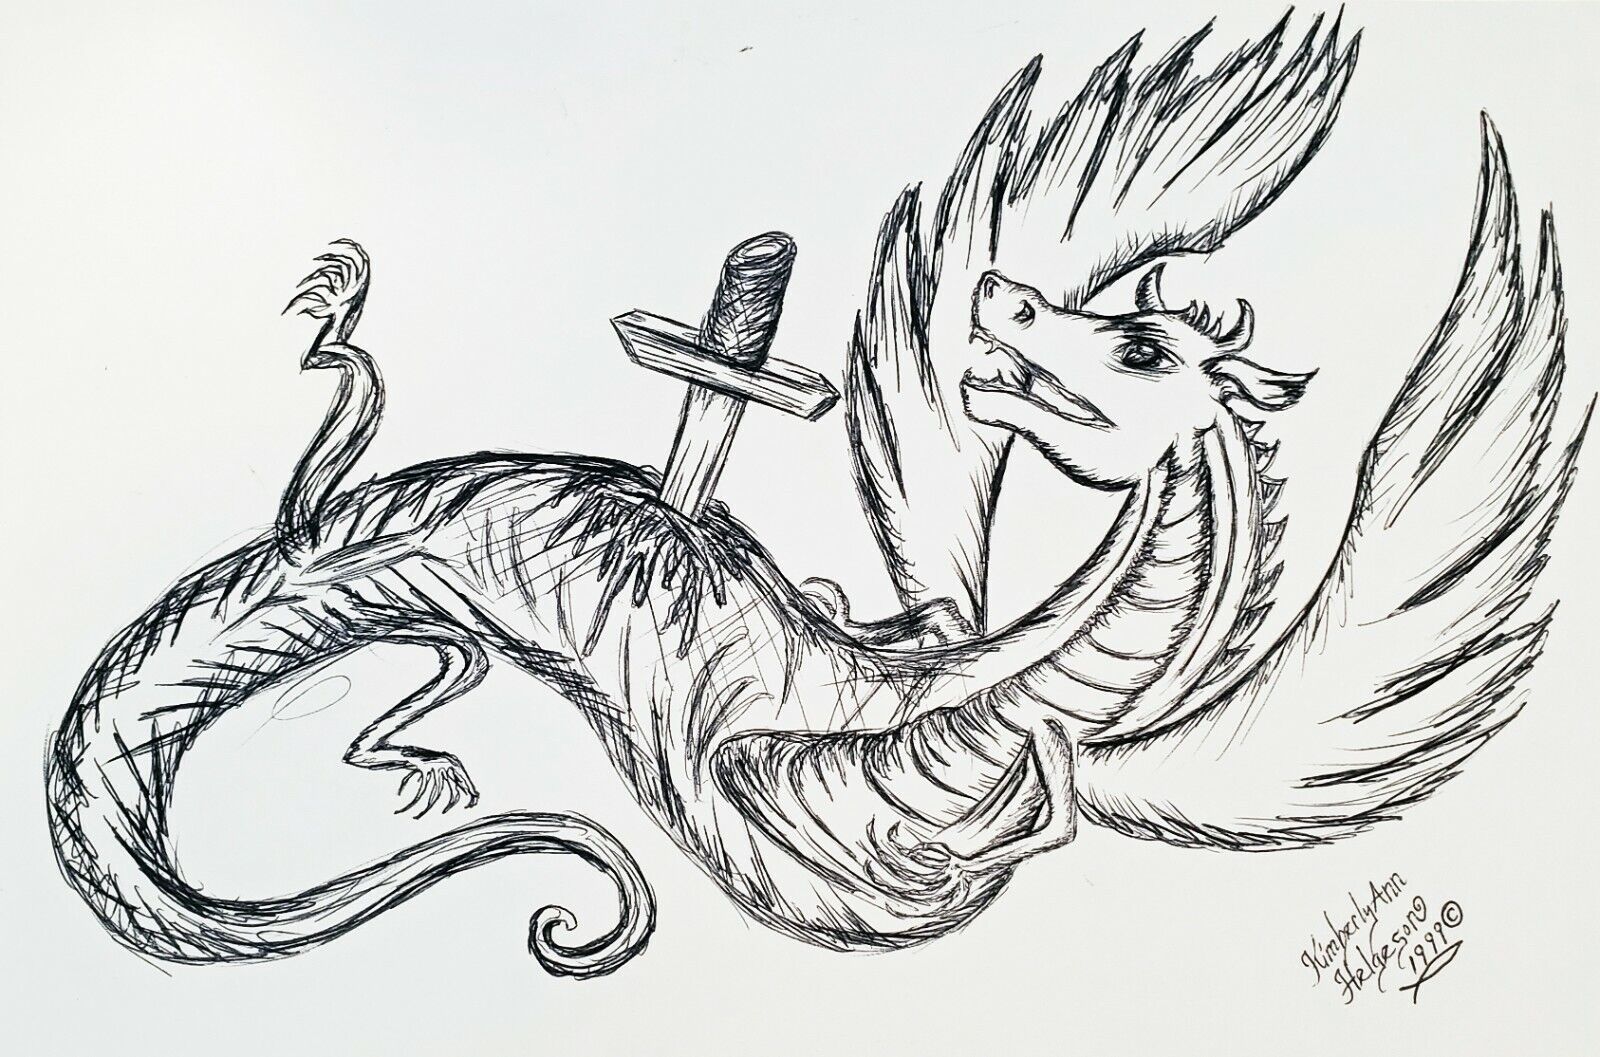 Death Of The Dragon 11x14 Art Print Of Black Ink Drawing Signed By Artist Ksams